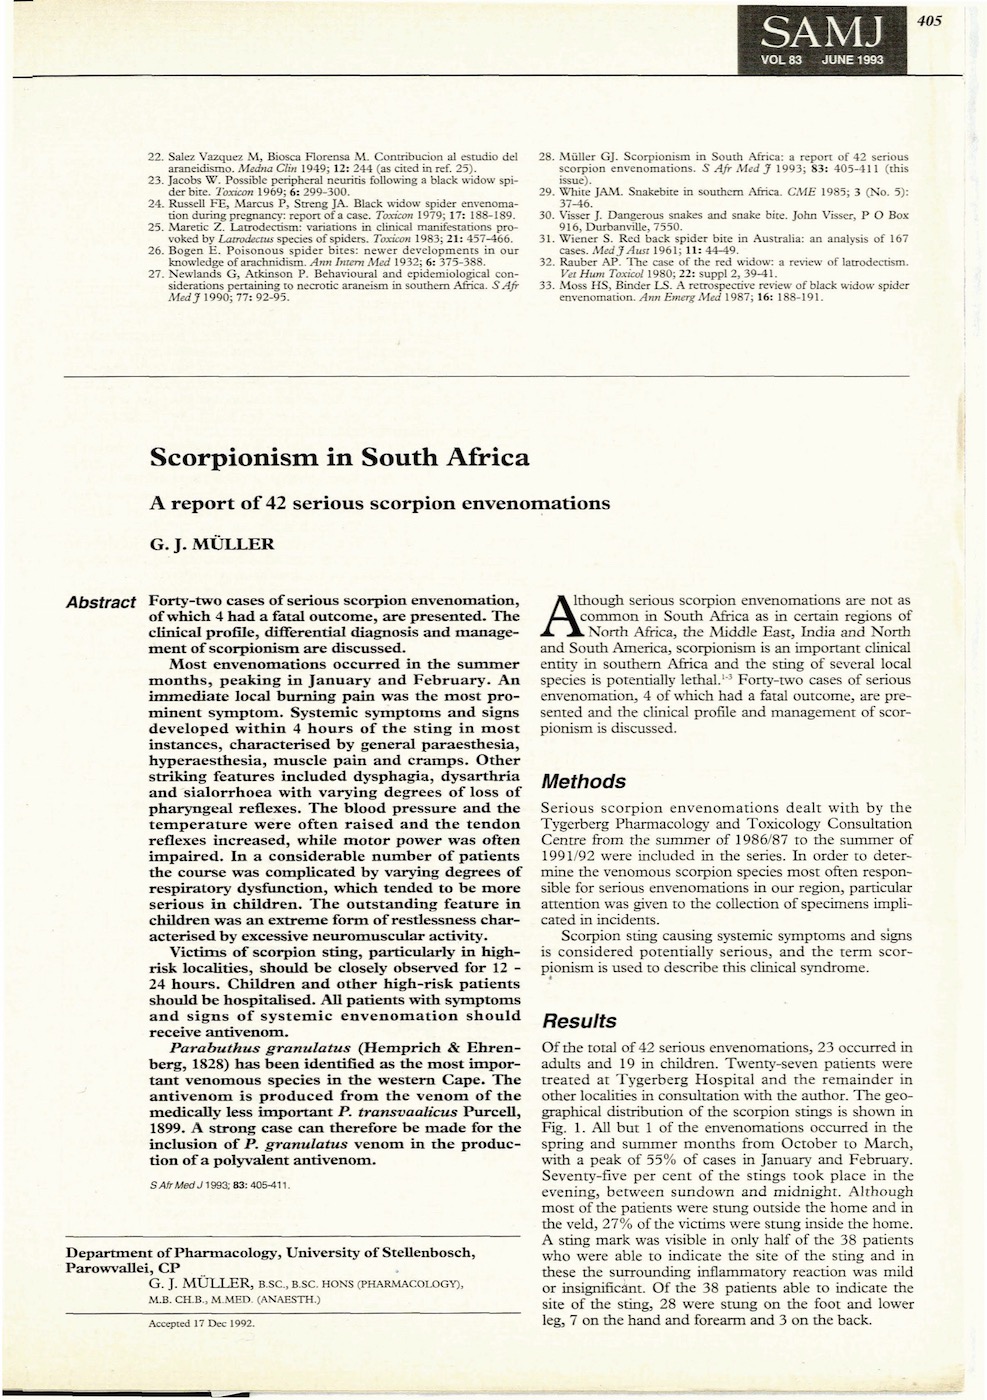 Scorpionism in South Africa - a report of 42 serious cases of envenomations